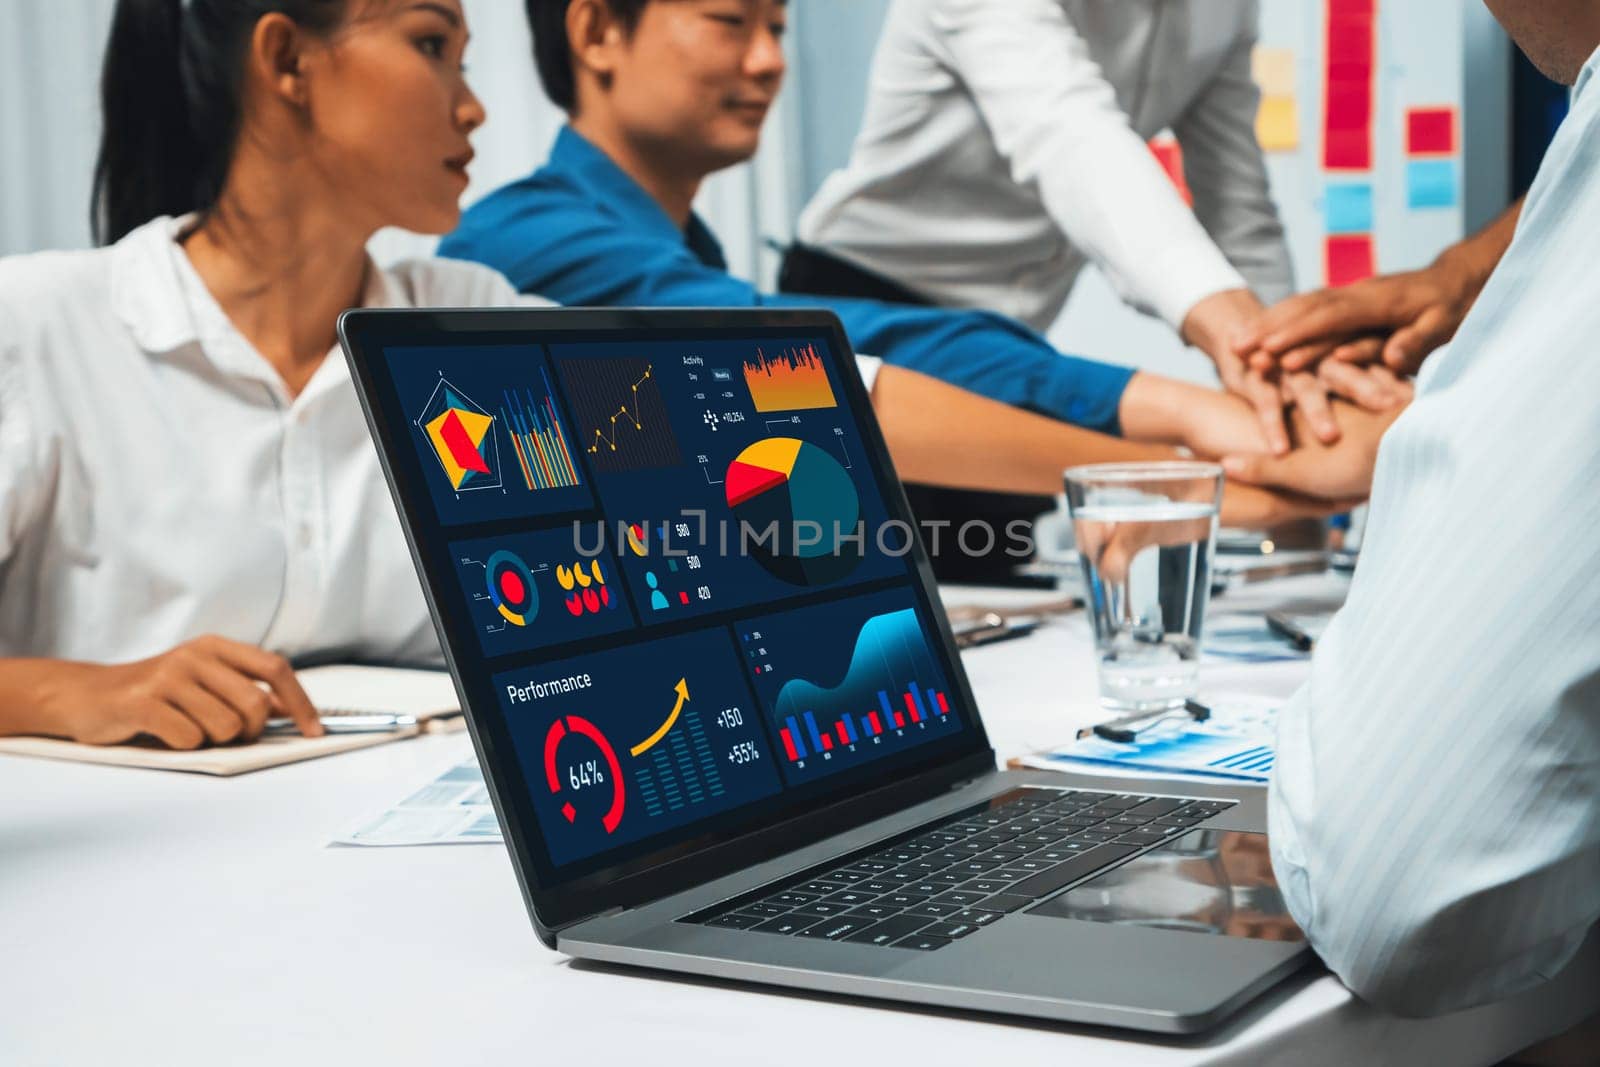 Bi dashboard display on laptop monitor analyzed Fintech technology empower effective financial data analyzing with background of analyst team join hand together symbolizing teamwork. Prudent